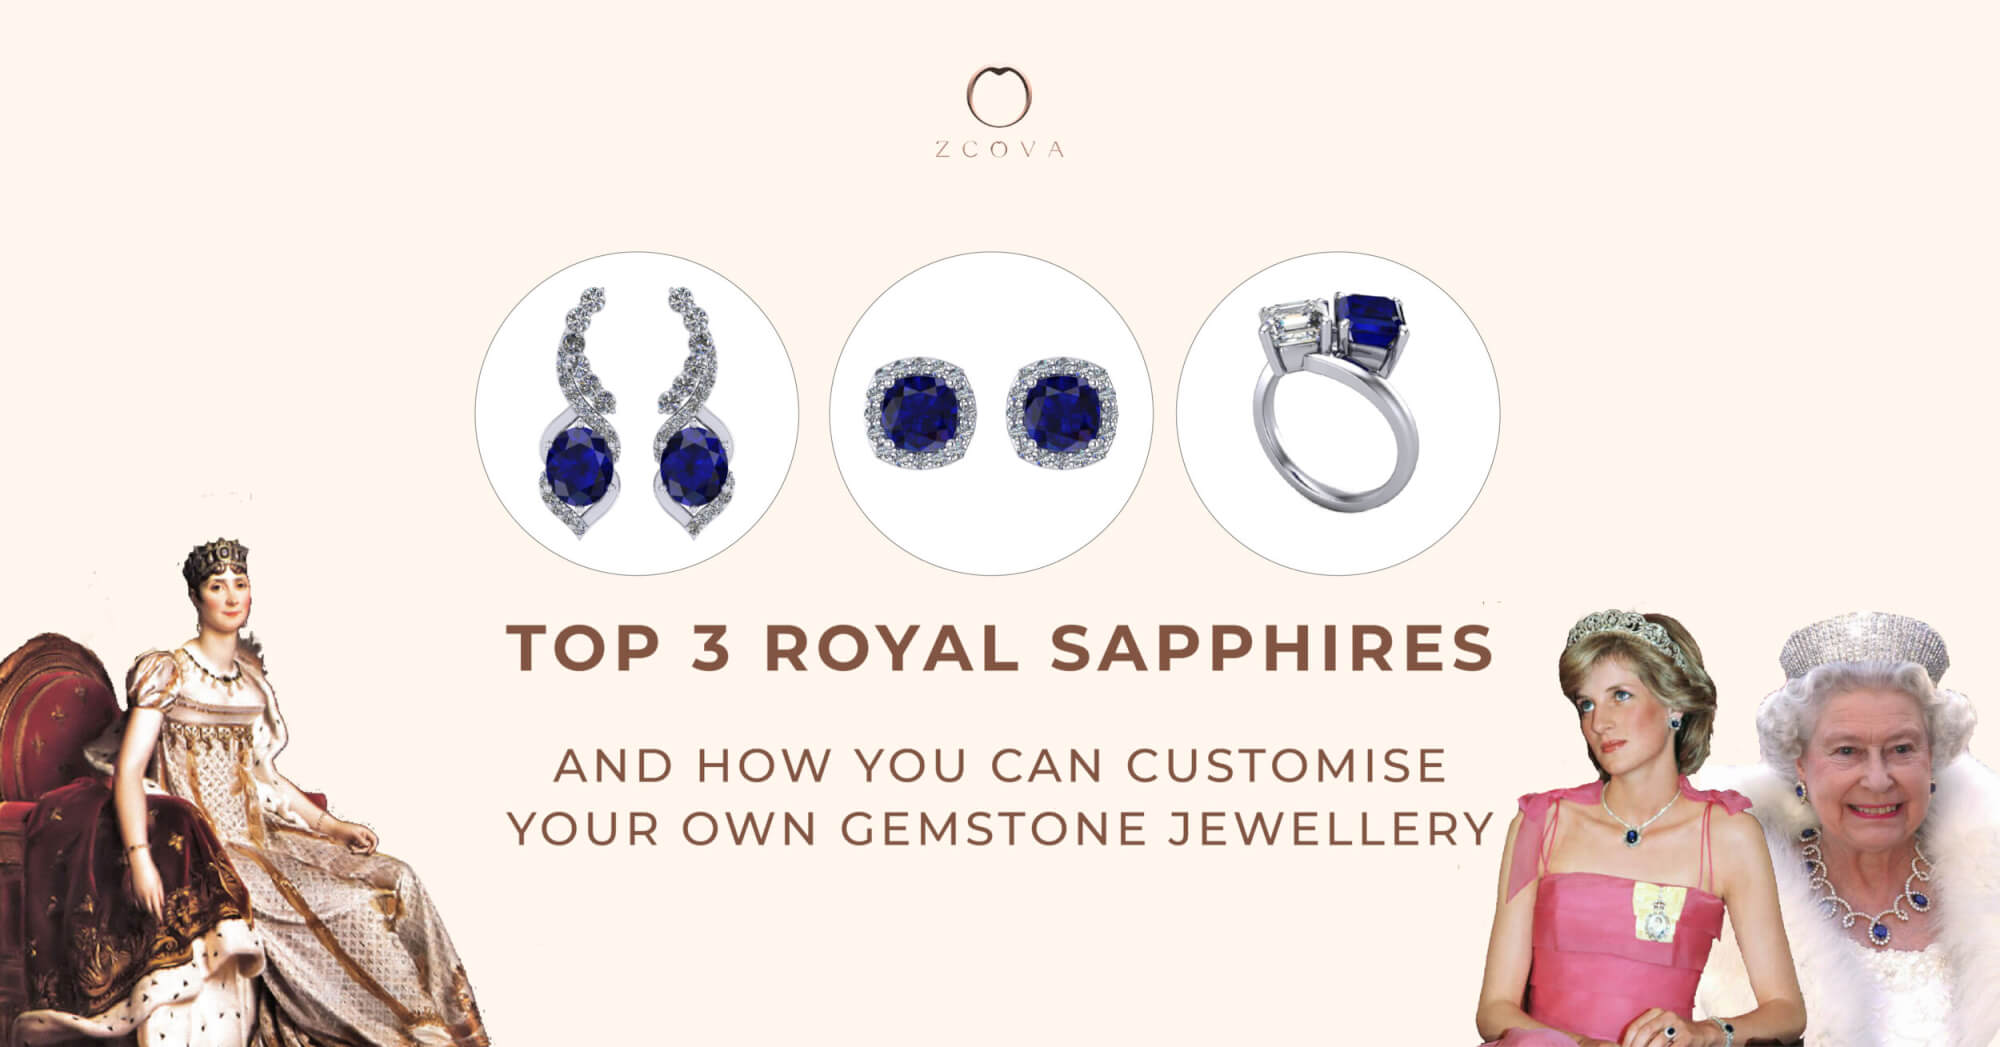 Top 3 Royal Sapphire and how you can customise your own gemstone jewellery inspired by Princess Diana, Queen Elizabeth, Empress Josephine